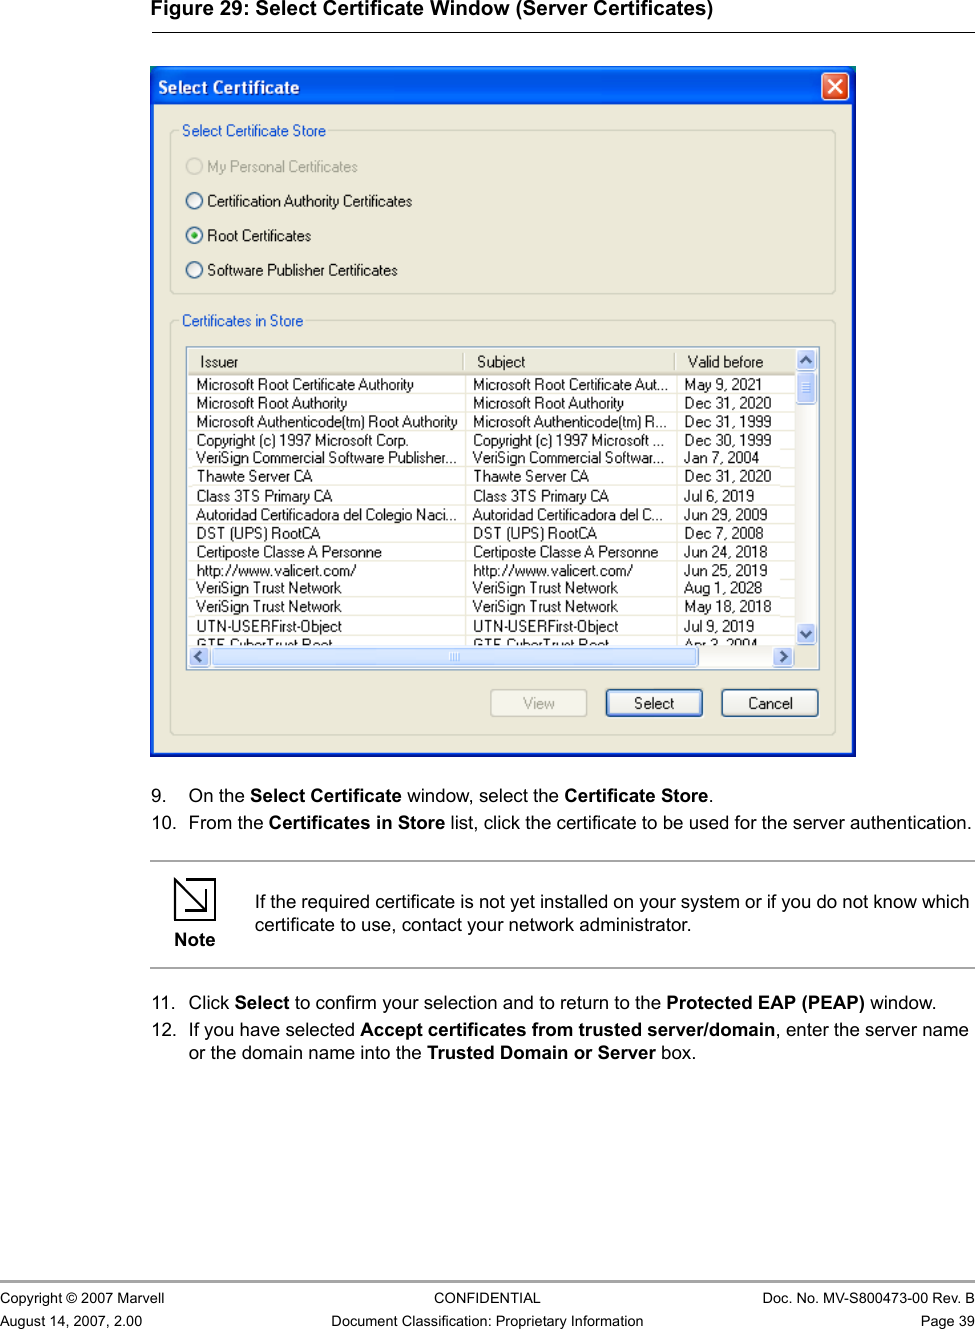 Marvell Wireless Configuration Utility User InterfaceProfile Manager Tab                         Copyright © 2007 Marvell CONFIDENTIAL Doc. No. MV-S800473-00 Rev. BAugust 14, 2007, 2.00 Document Classification: Proprietary Information Page 39                          9. On the Select Certificate window, select the Certificate Store.10. From the Certificates in Store list, click the certificate to be used for the server authentication.11. Click Select to confirm your selection and to return to the Protected EAP (PEAP) window.12. If you have selected Accept certificates from trusted server/domain, enter the server name or the domain name into the Trusted Domain or Server box.Figure 29: Select Certificate Window (Server Certificates)                         NoteIf the required certificate is not yet installed on your system or if you do not know which certificate to use, contact your network administrator.